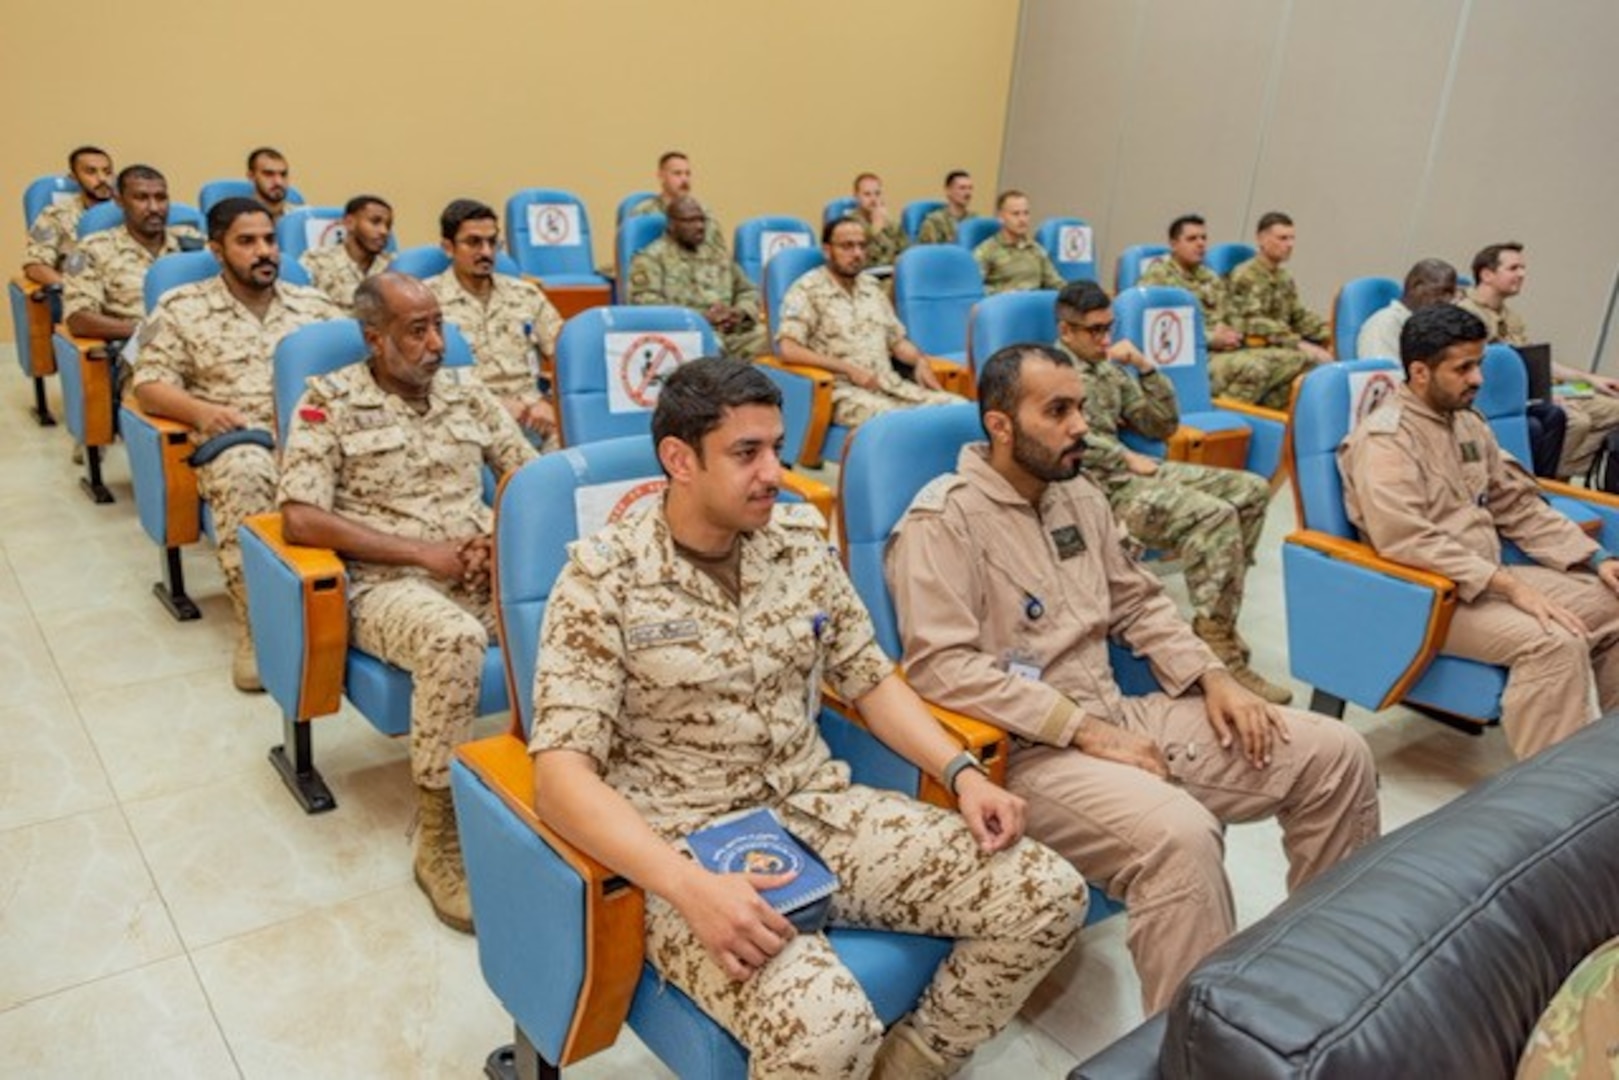 Courtesy photo from Royal Bahraini Air Force of interactions between U.S. Air Force service members and members from the RBAF.